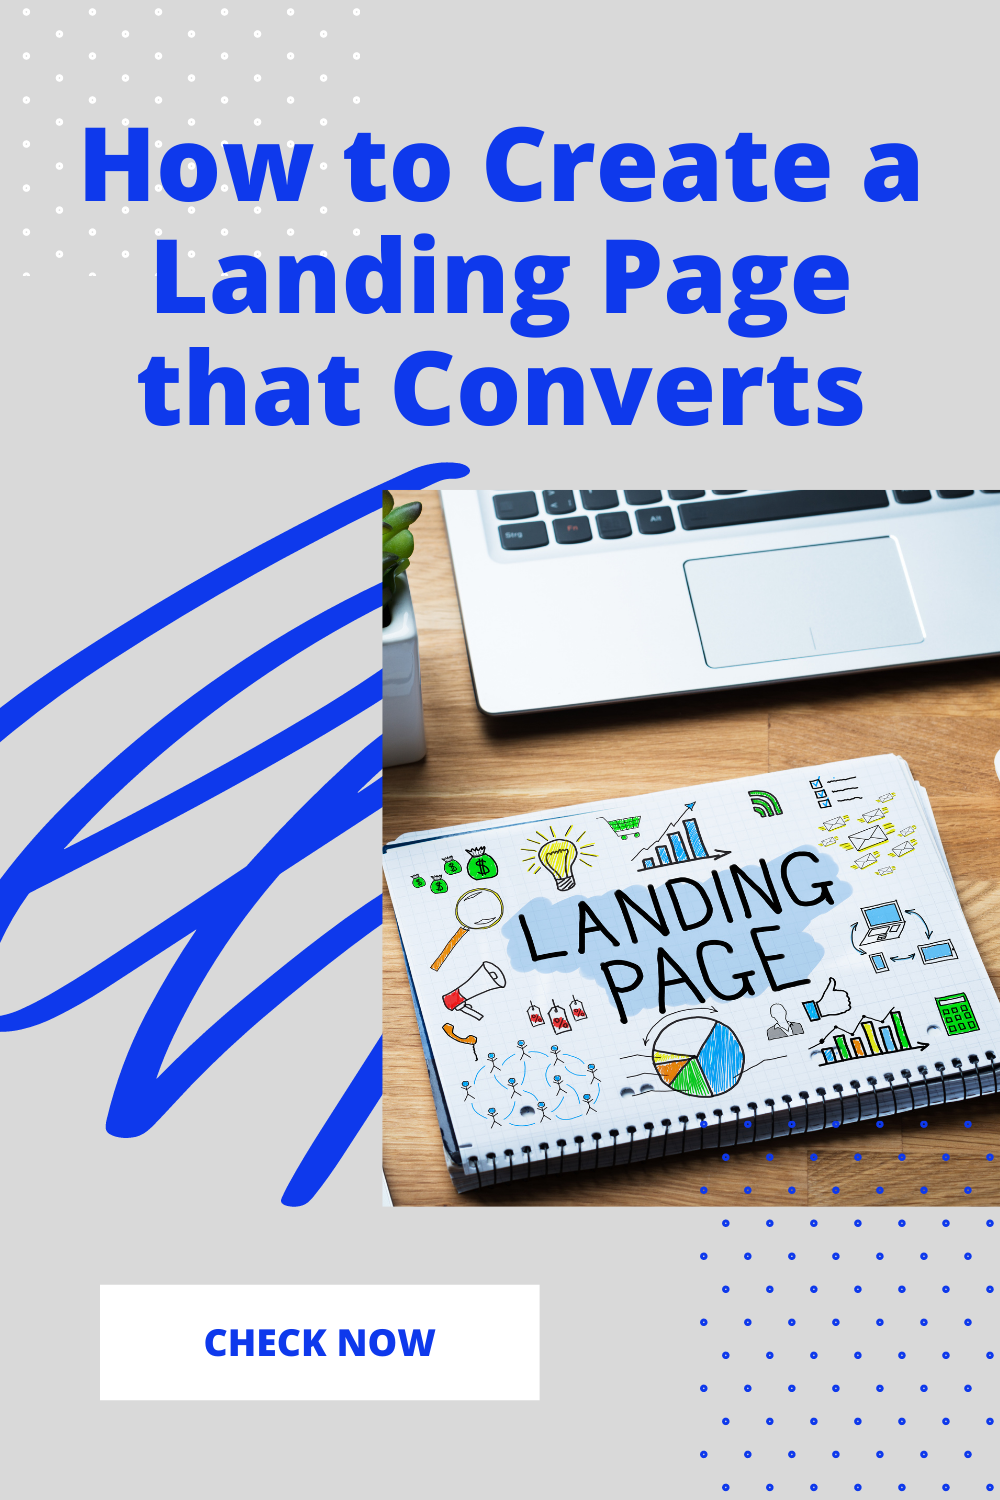 How to Create a Landing Page that Converts